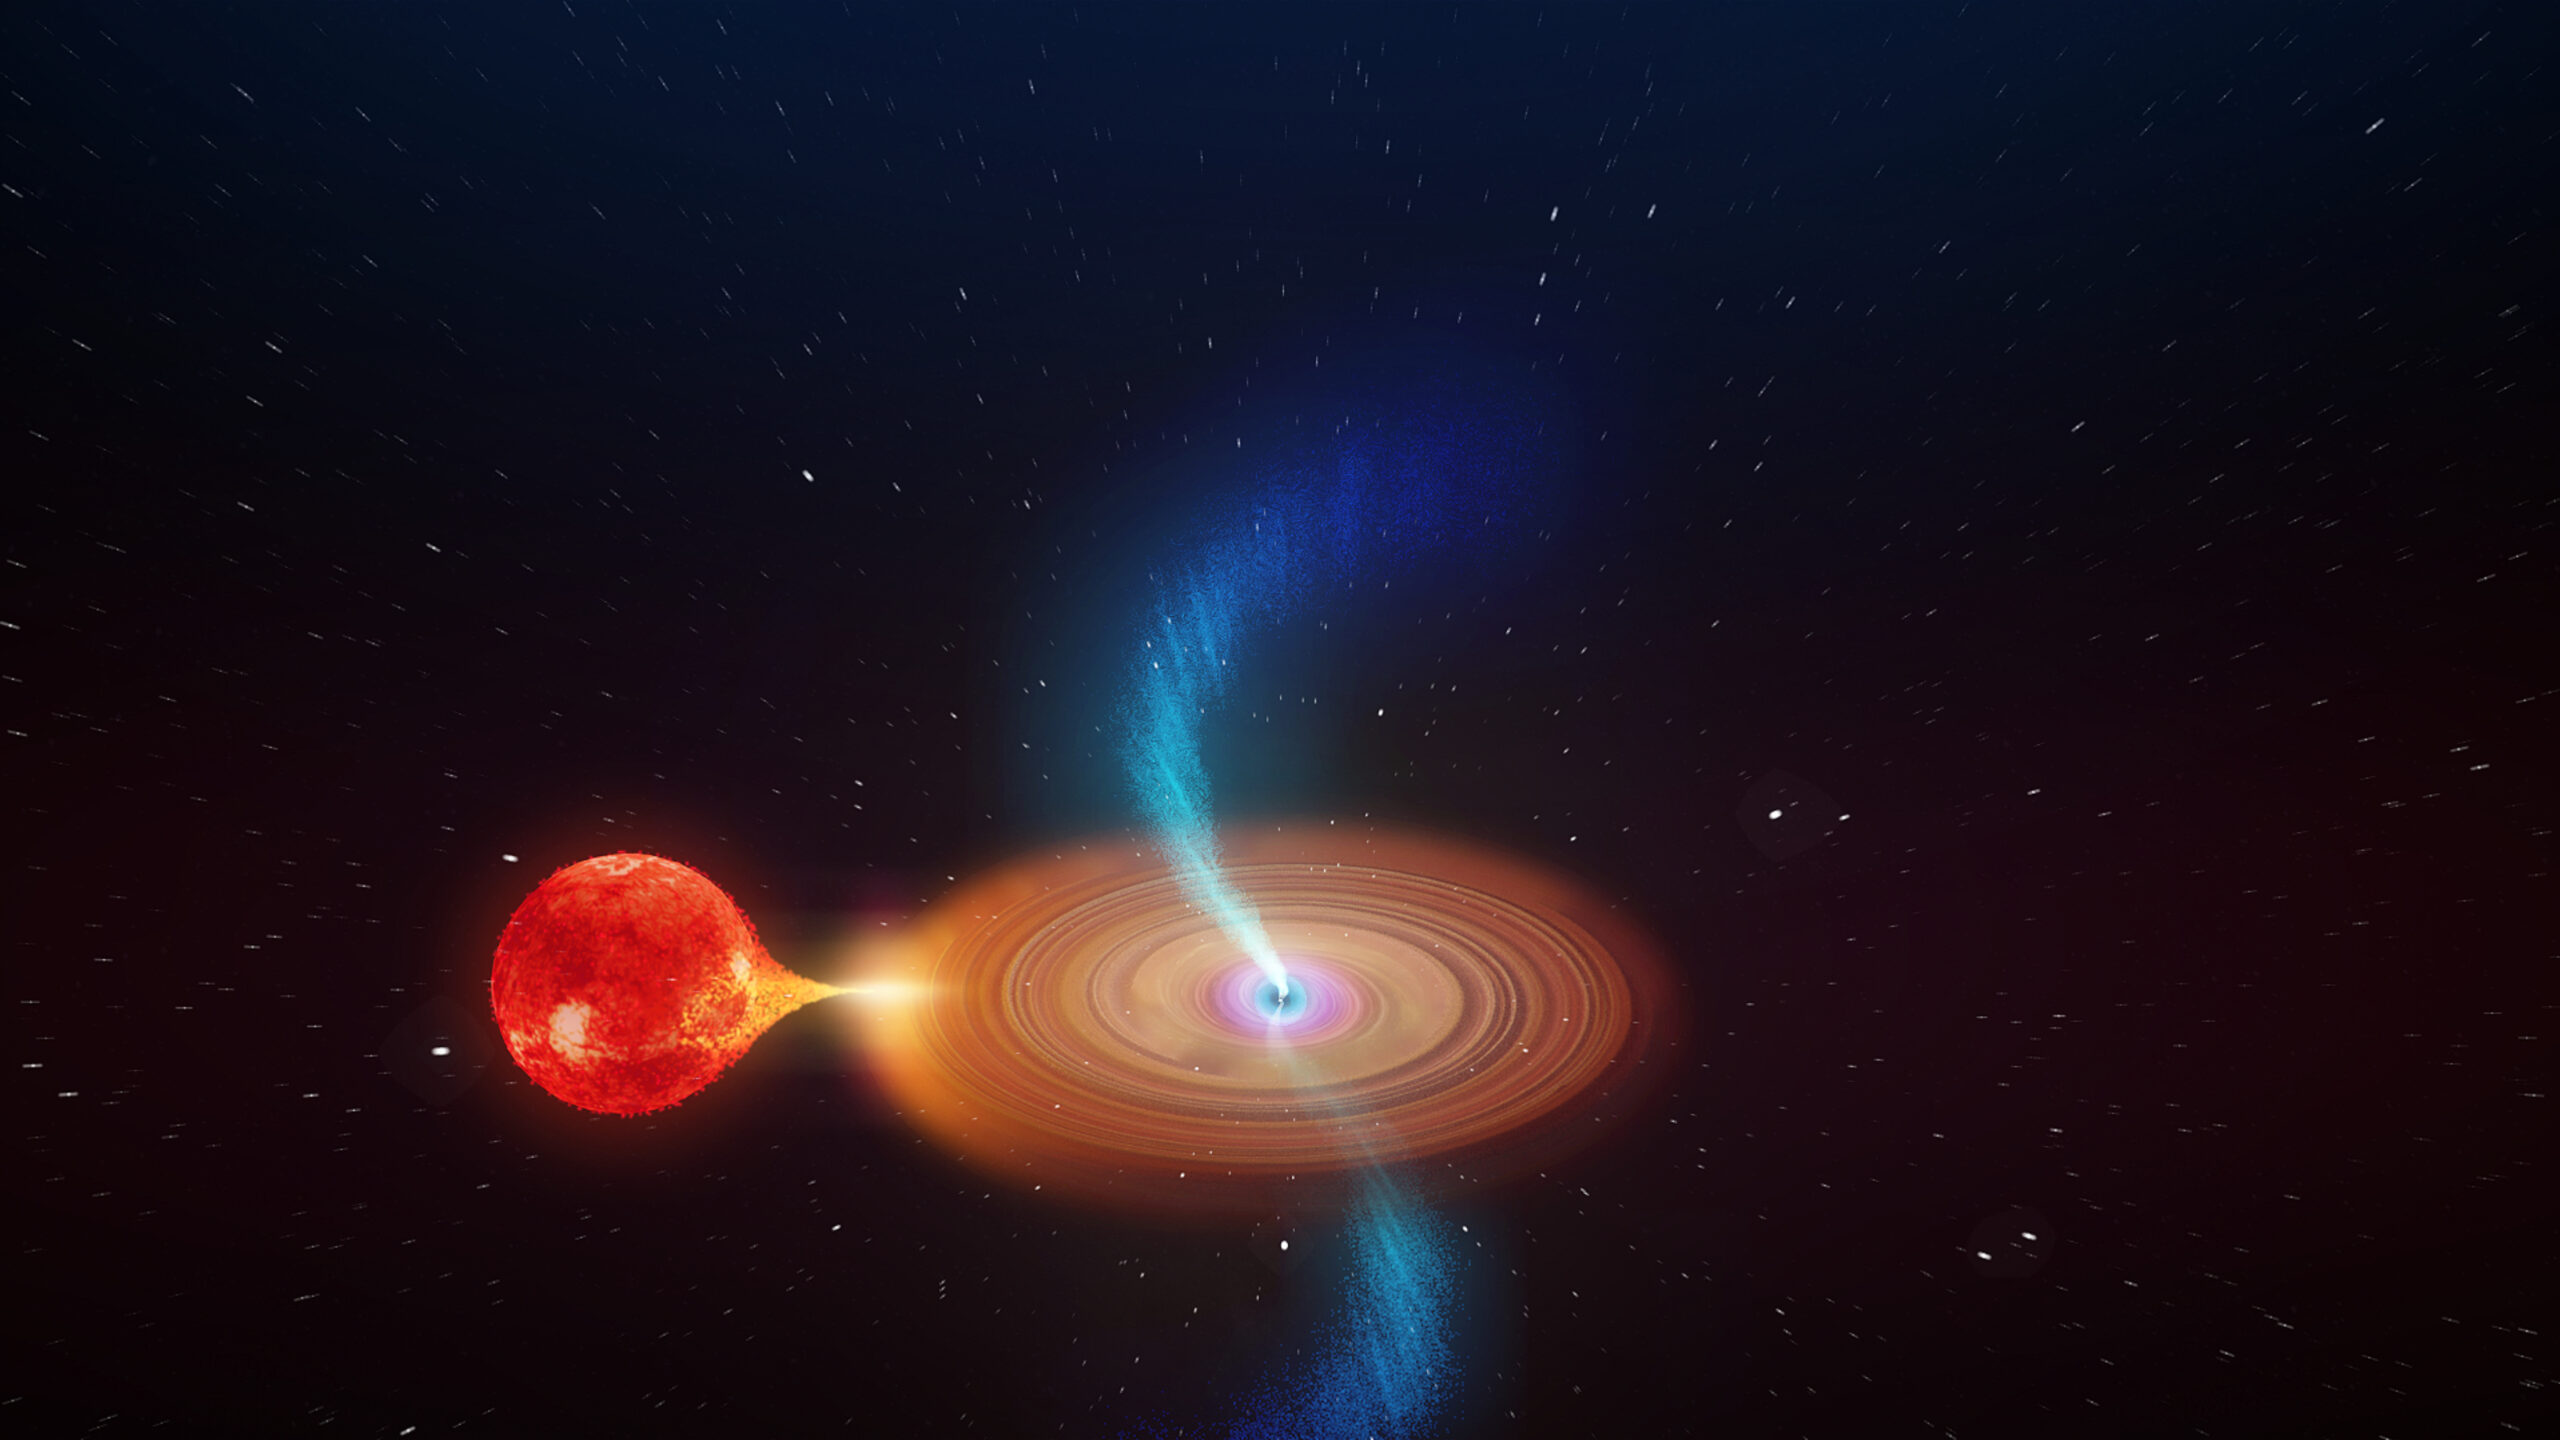 WA Astronomers track “Spinning Top” black hole